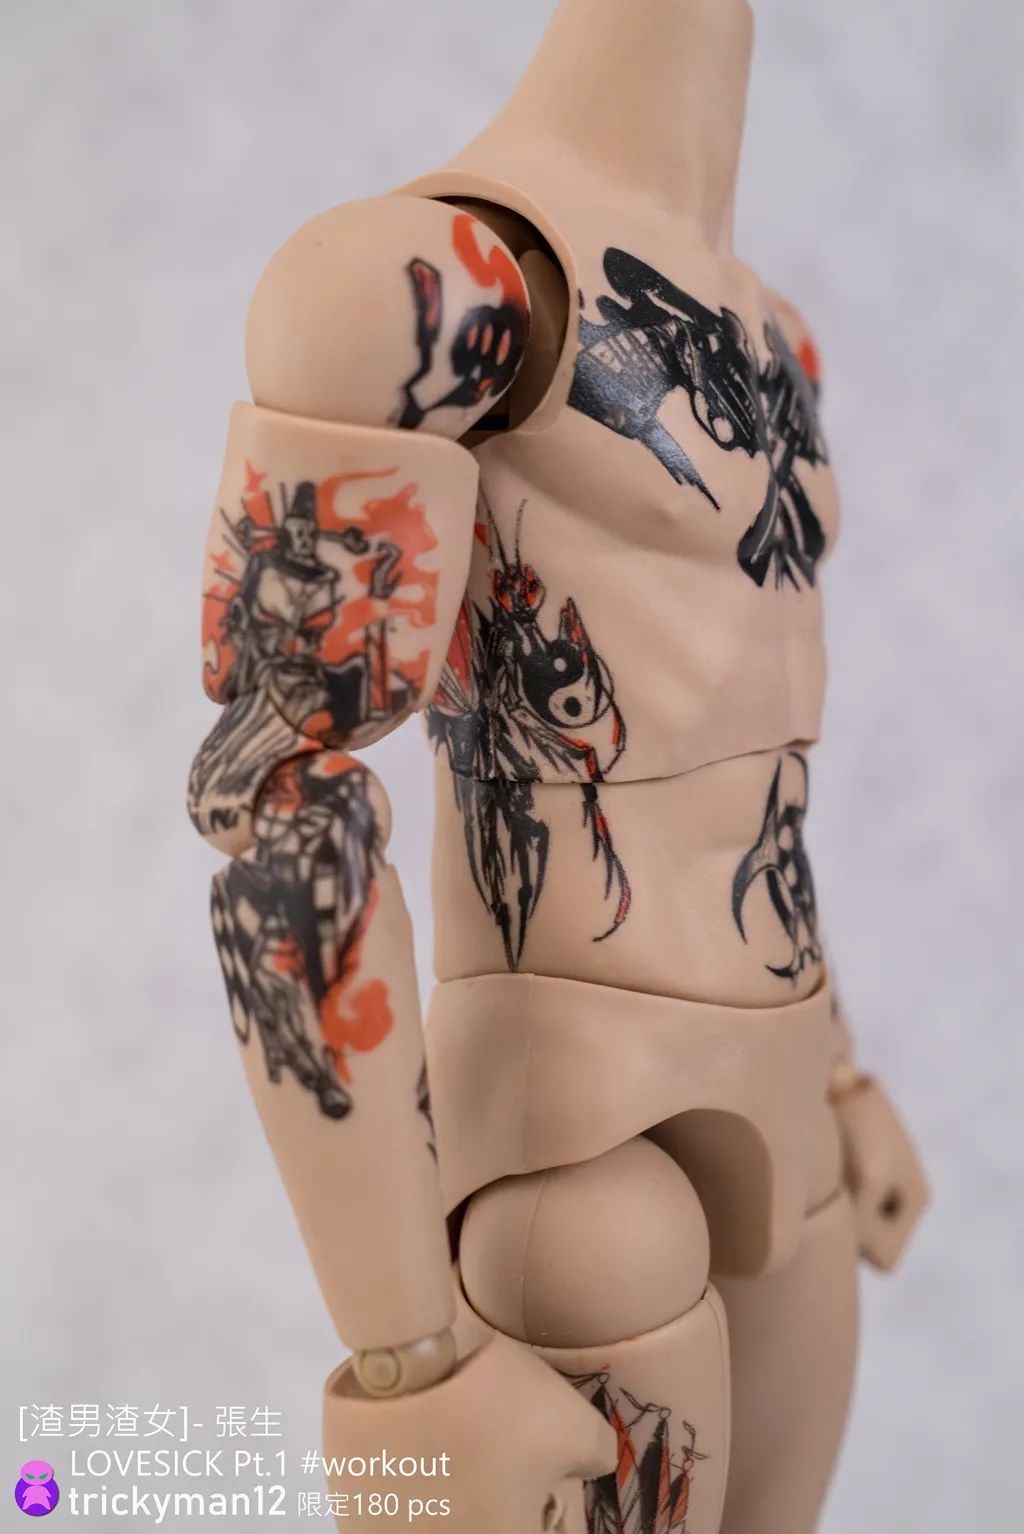 NEW PRODUCT: Trickyman12: 1/6 "Scumbag" series - Zhang Sheng LOVESICK Pt.1 action figure 17562711